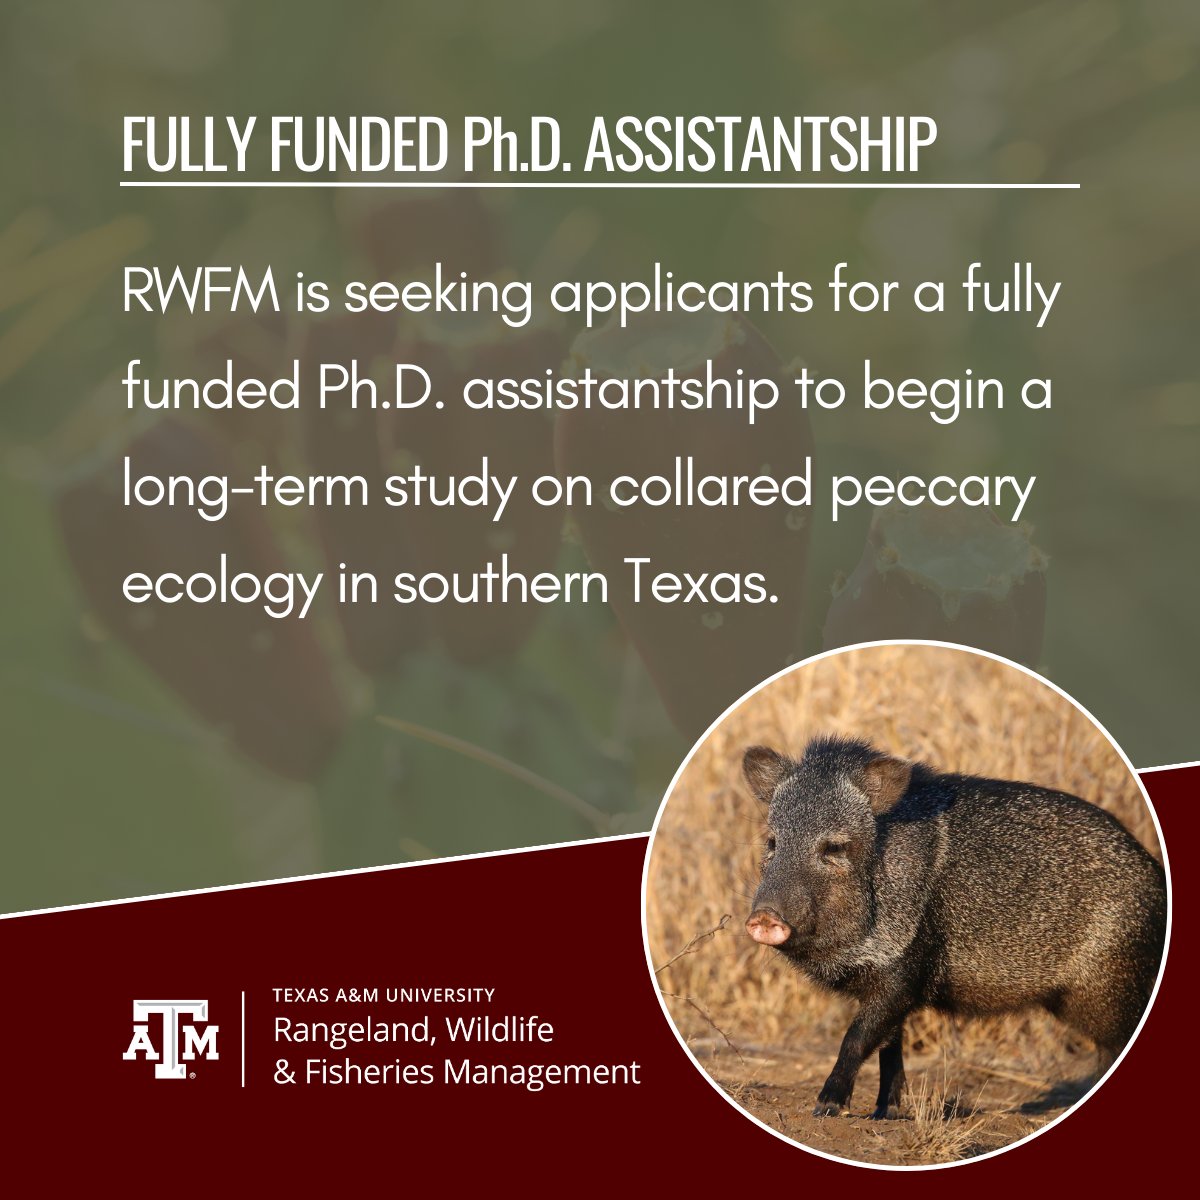 We are excited to announce that we are seeking applicants for a fully funded Ph.D. assistantship to begin a long-term study on collared peccary ecology in southern Texas. Learn more: jobs.rwfm.tamu.edu/view-job/?id=9… #WildlifeBiologist #Research #GradSchool #PhD #WildlifeResearch #Wildlife